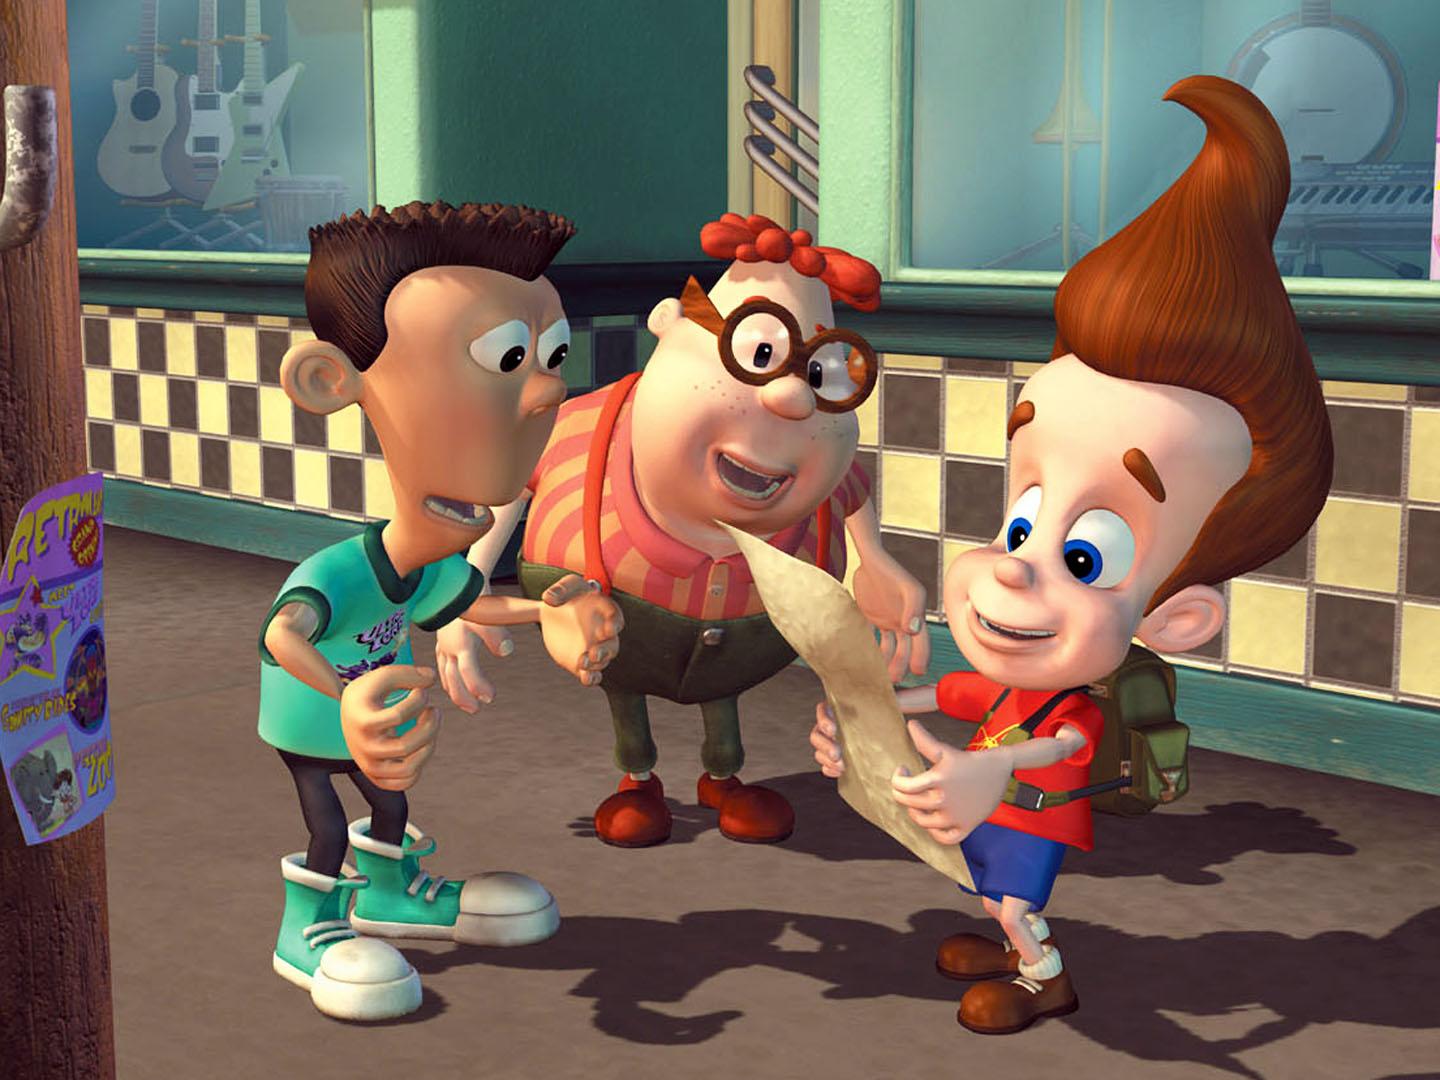 Jimmy, Carl and Sheen's Friendship